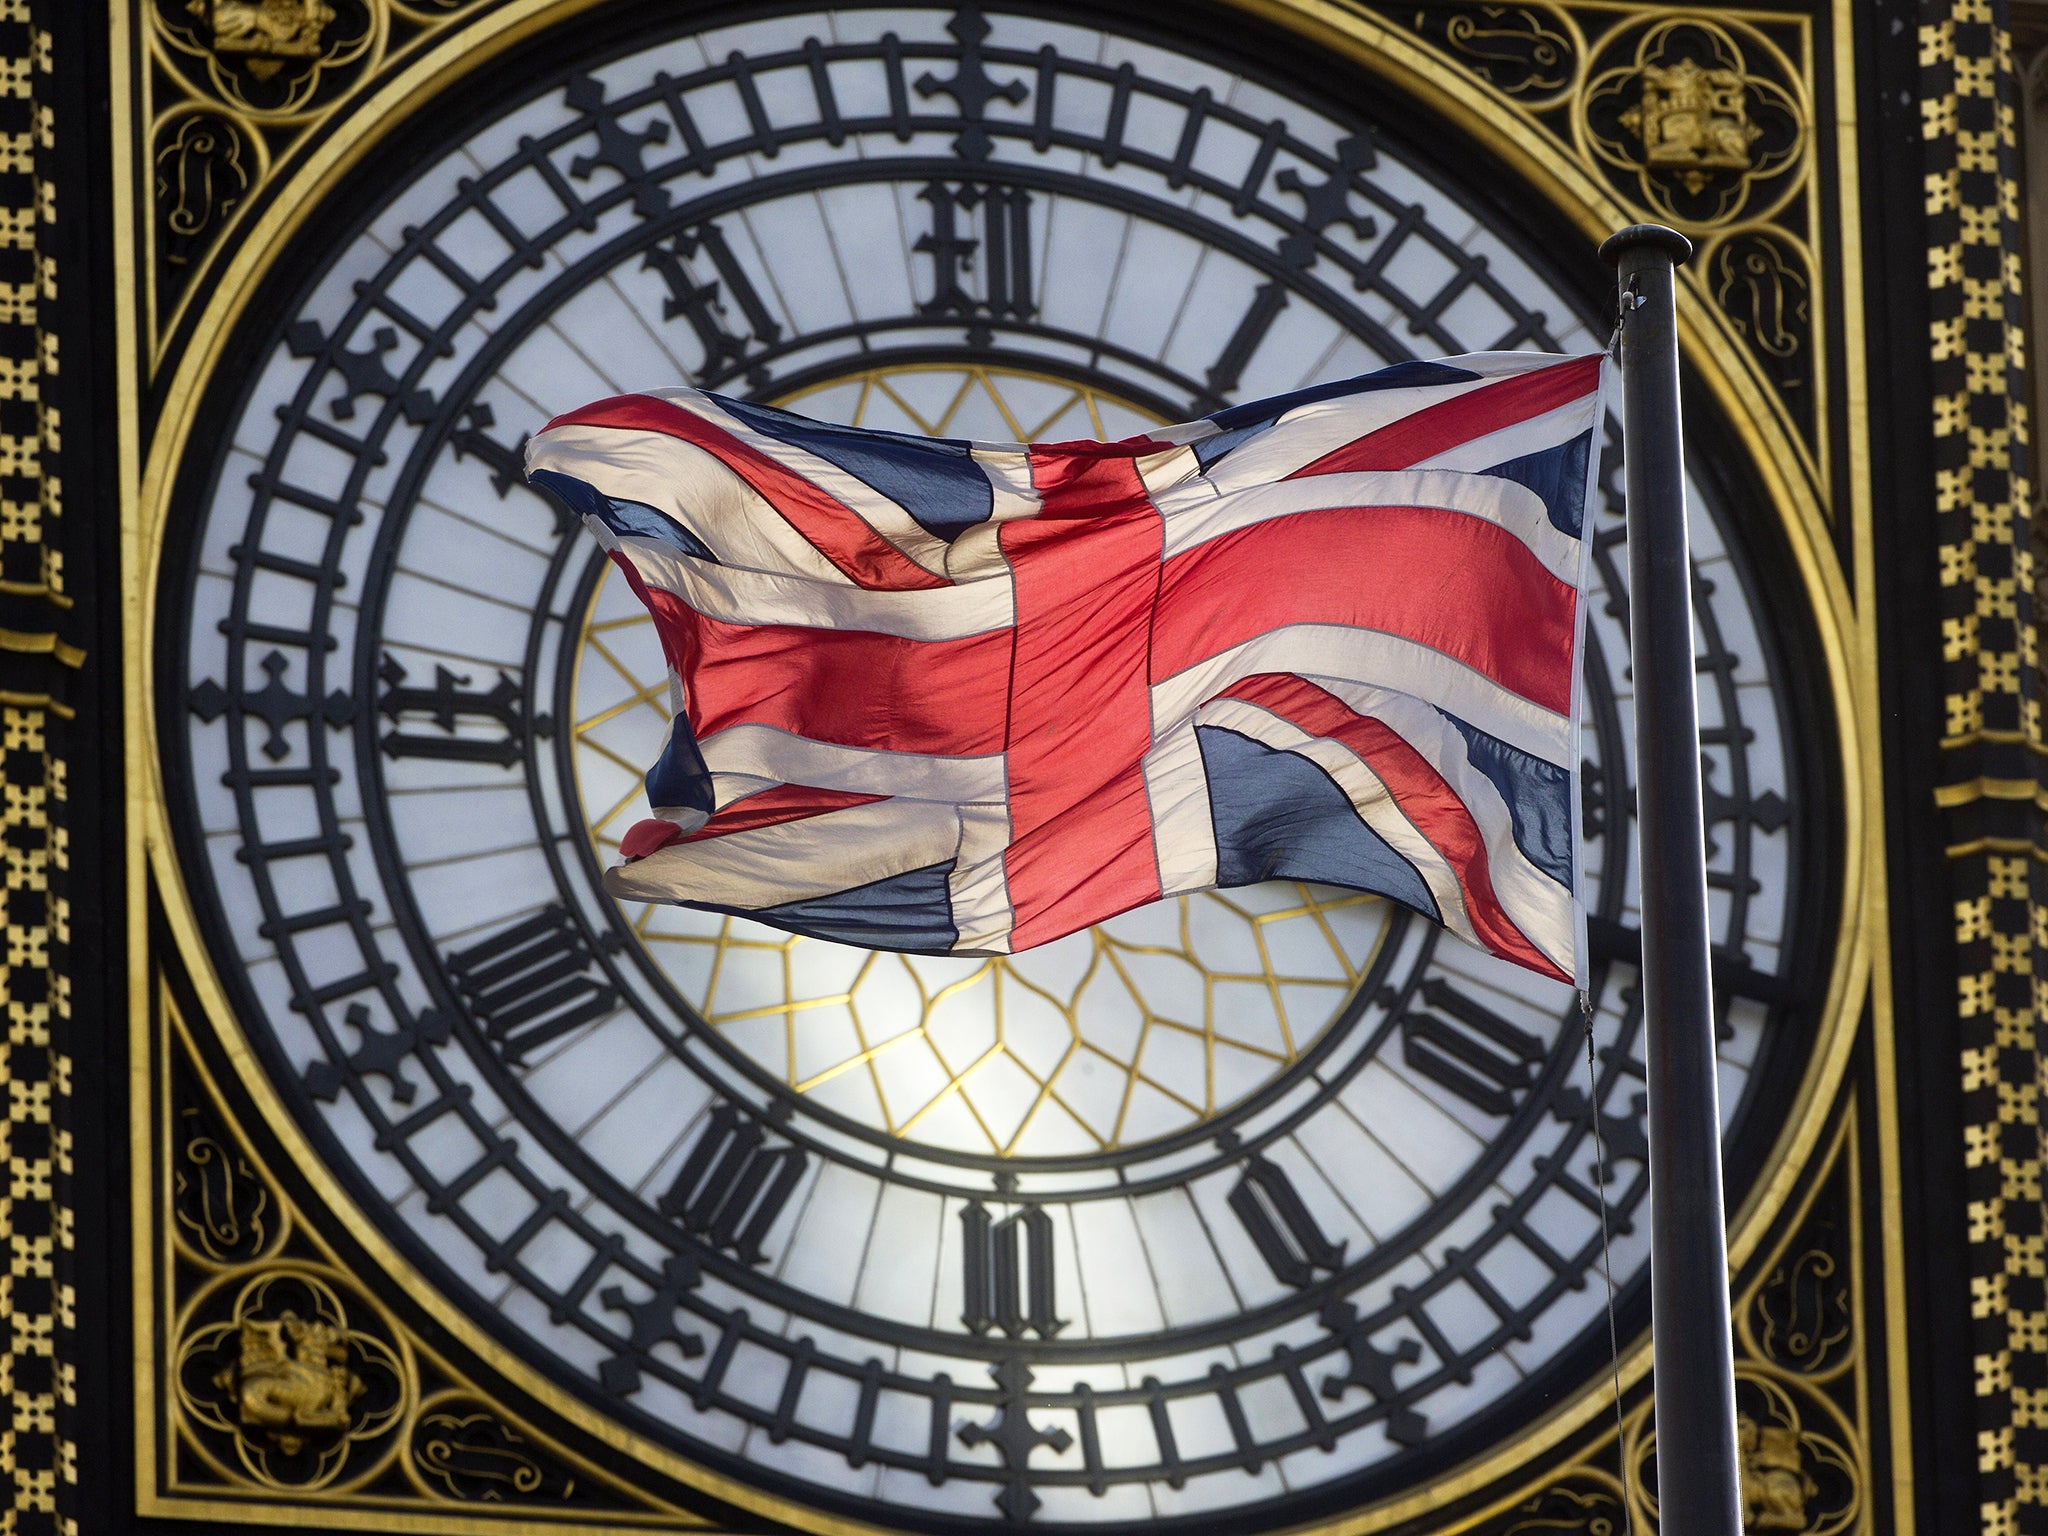 The Union flag is seen flapping in the wind in front of one of the faces of the Great Clock atop the landmark Elizabeth Tower that houses Big Ben at the Houses of Parliament